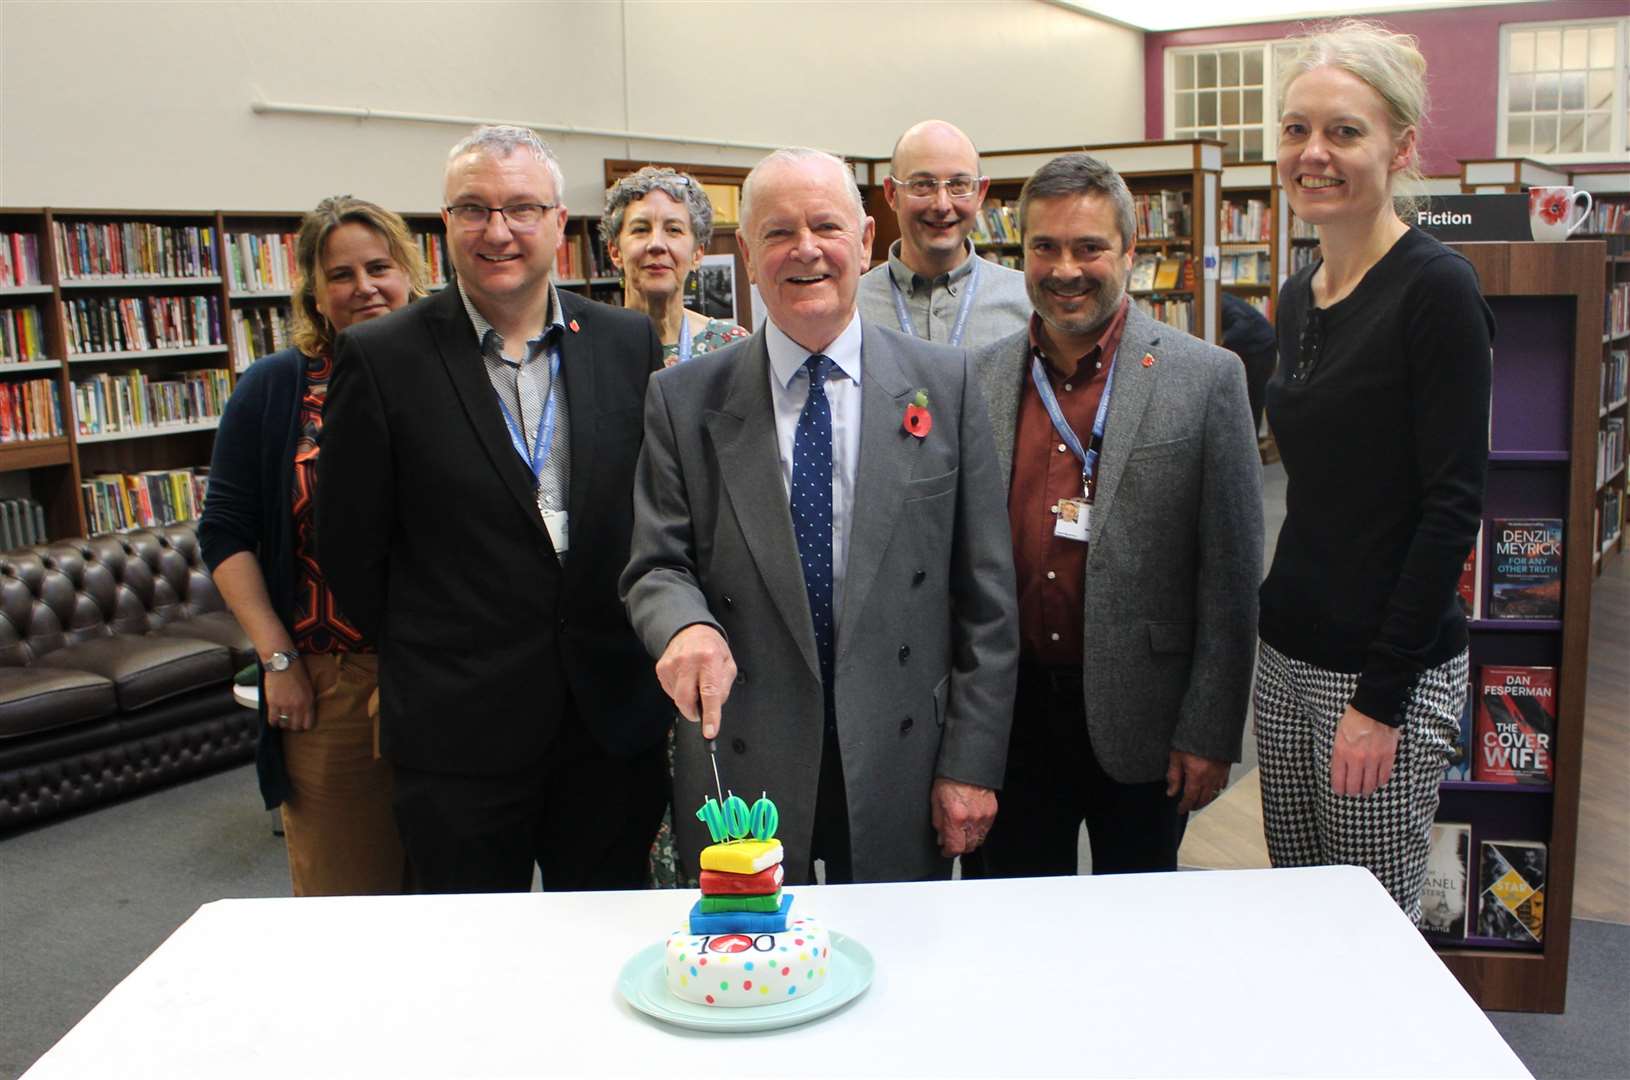 KCC's cabinet member for libraries, Cllr Mike Hill, cuts a celebratory cake to mark the service's 100th birthday, with staff at Dartford library